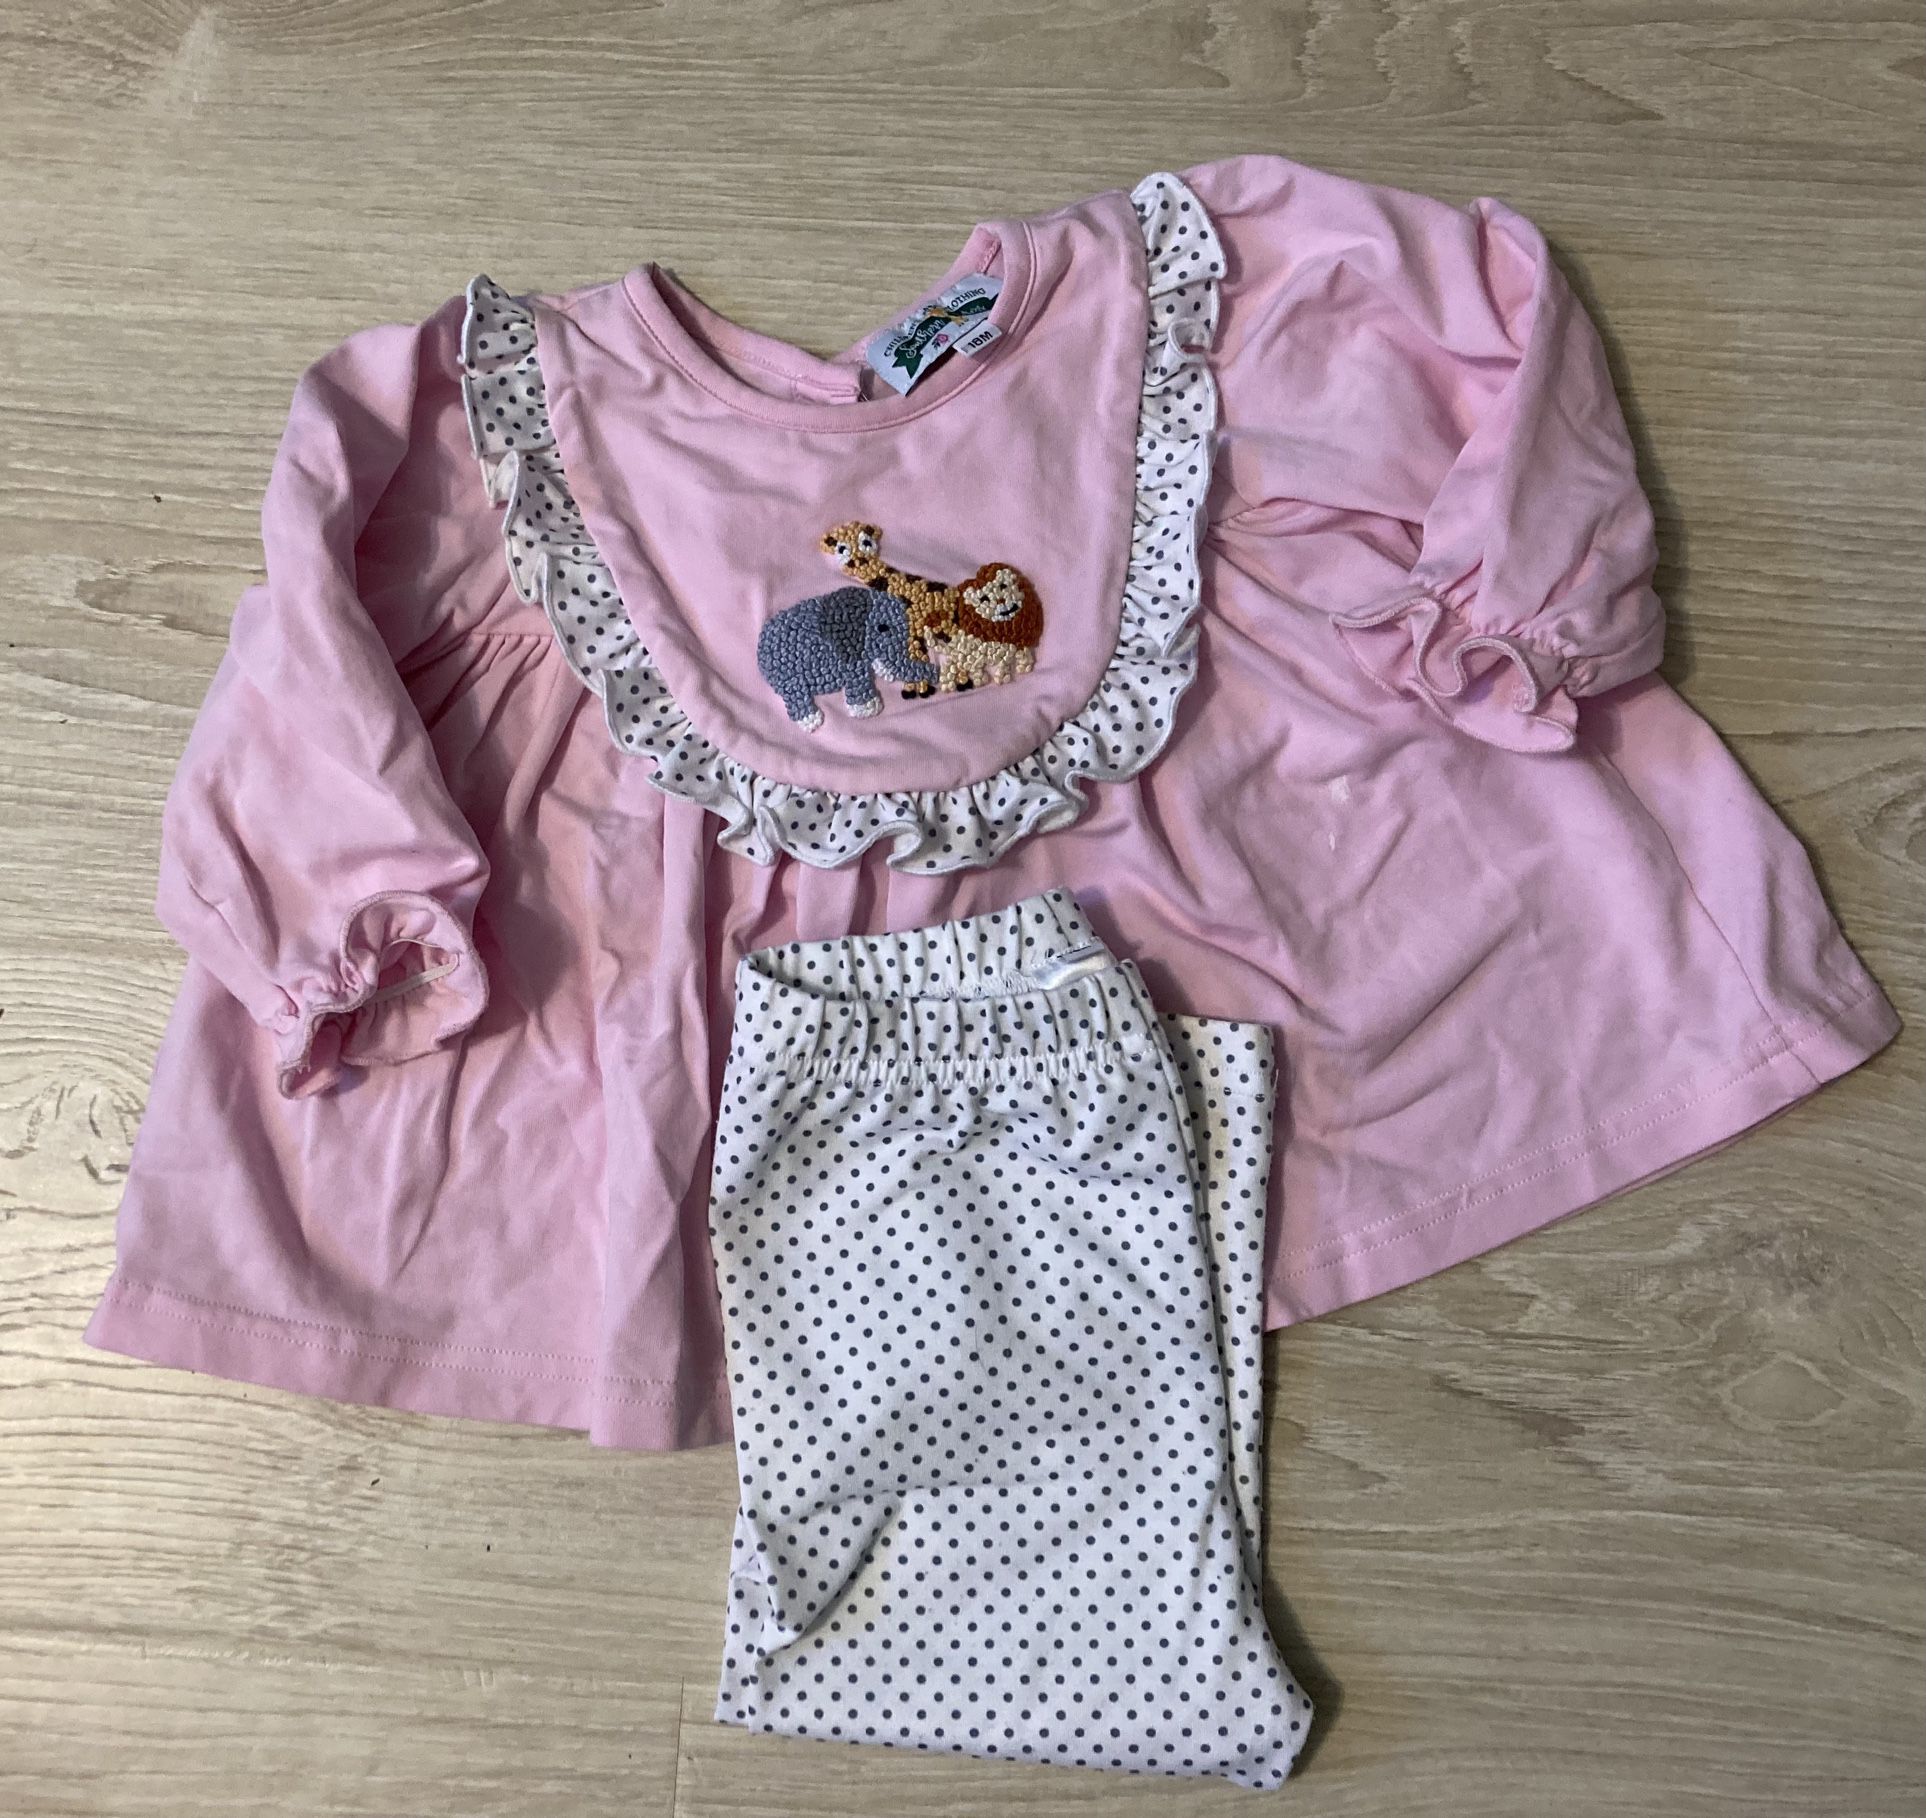 Toddler Girl Smocked Outfits